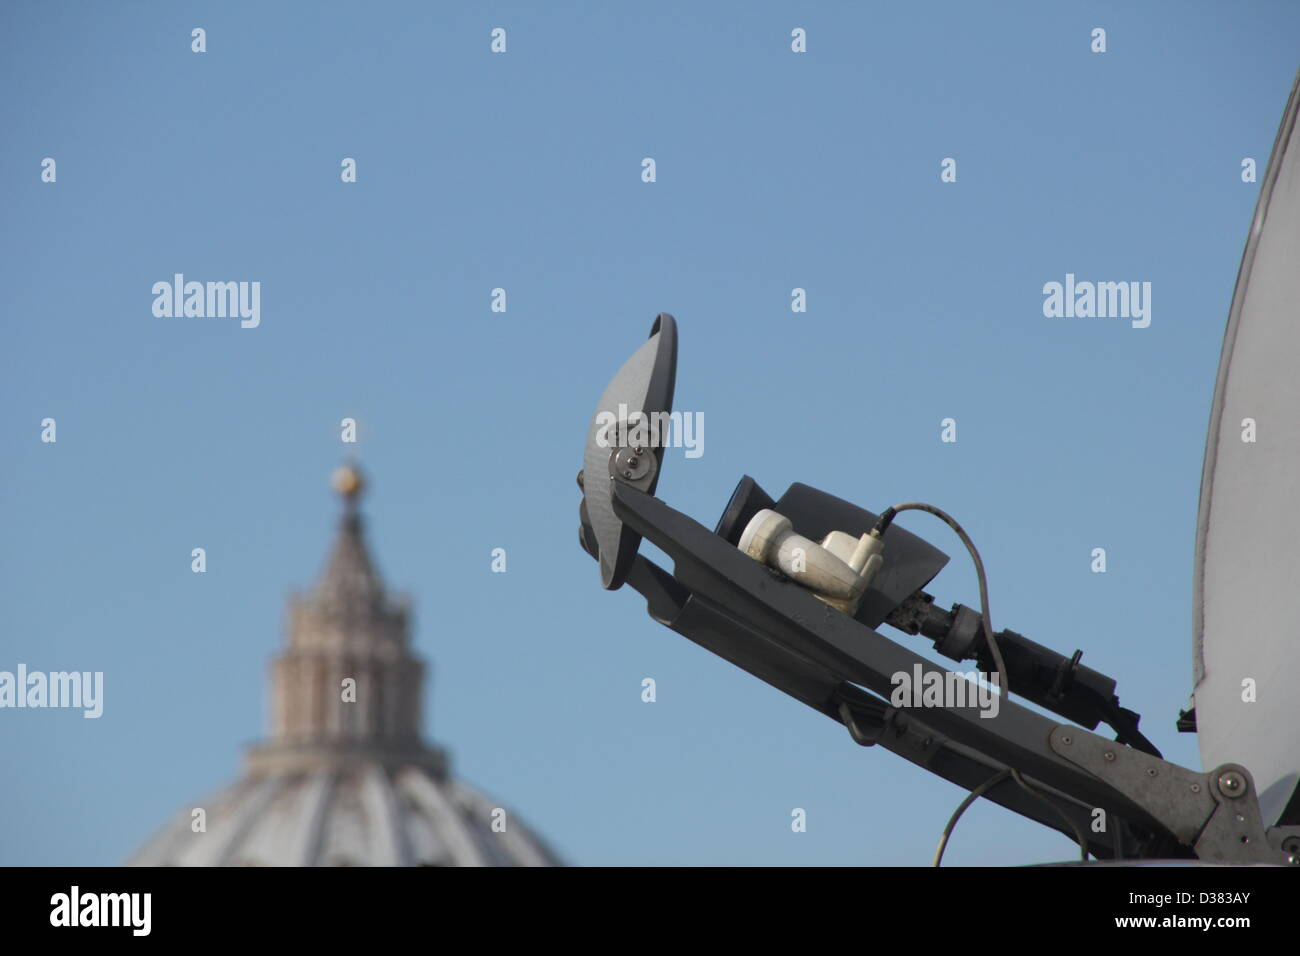 Vatican City, Rome, Italy. 12th February 2013. The world's media at the Vatican City, Rome following the resignation announcement by Pope Benedict XVI. Credit: Gari Wyn Williams / Alamy Live News Stock Photo